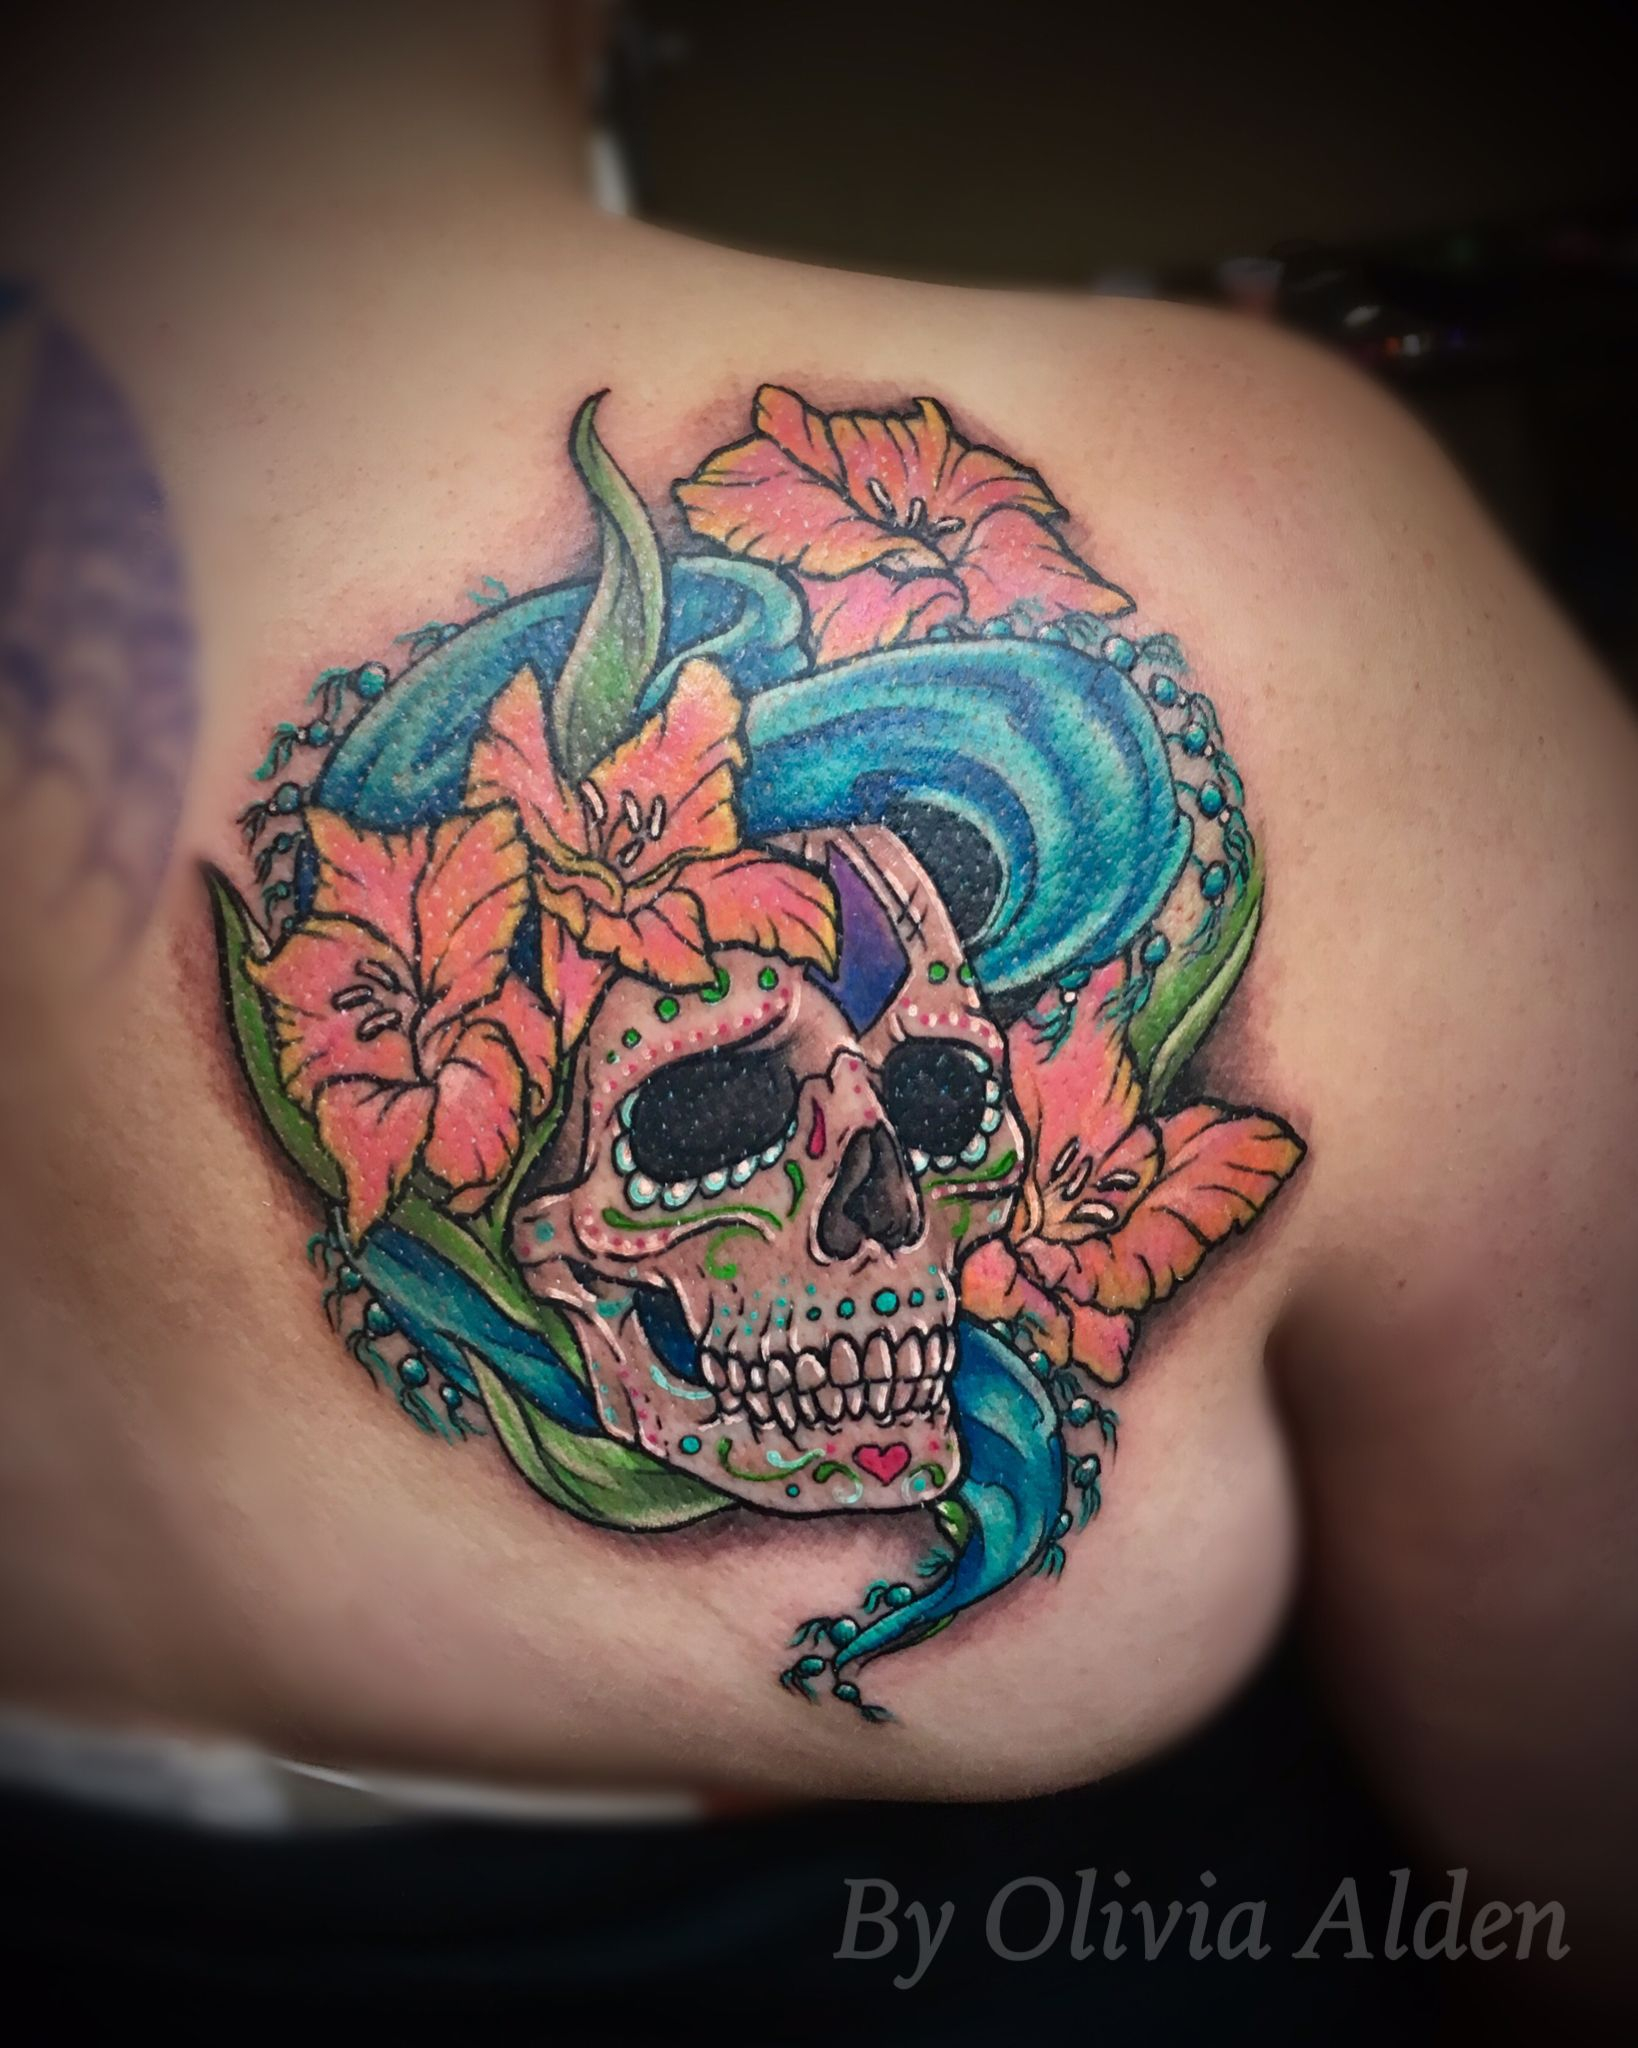 Gladiolus Flowers And A Day Of The Dead Skull And Shall Colorful throughout dimensions 1638 X 2048